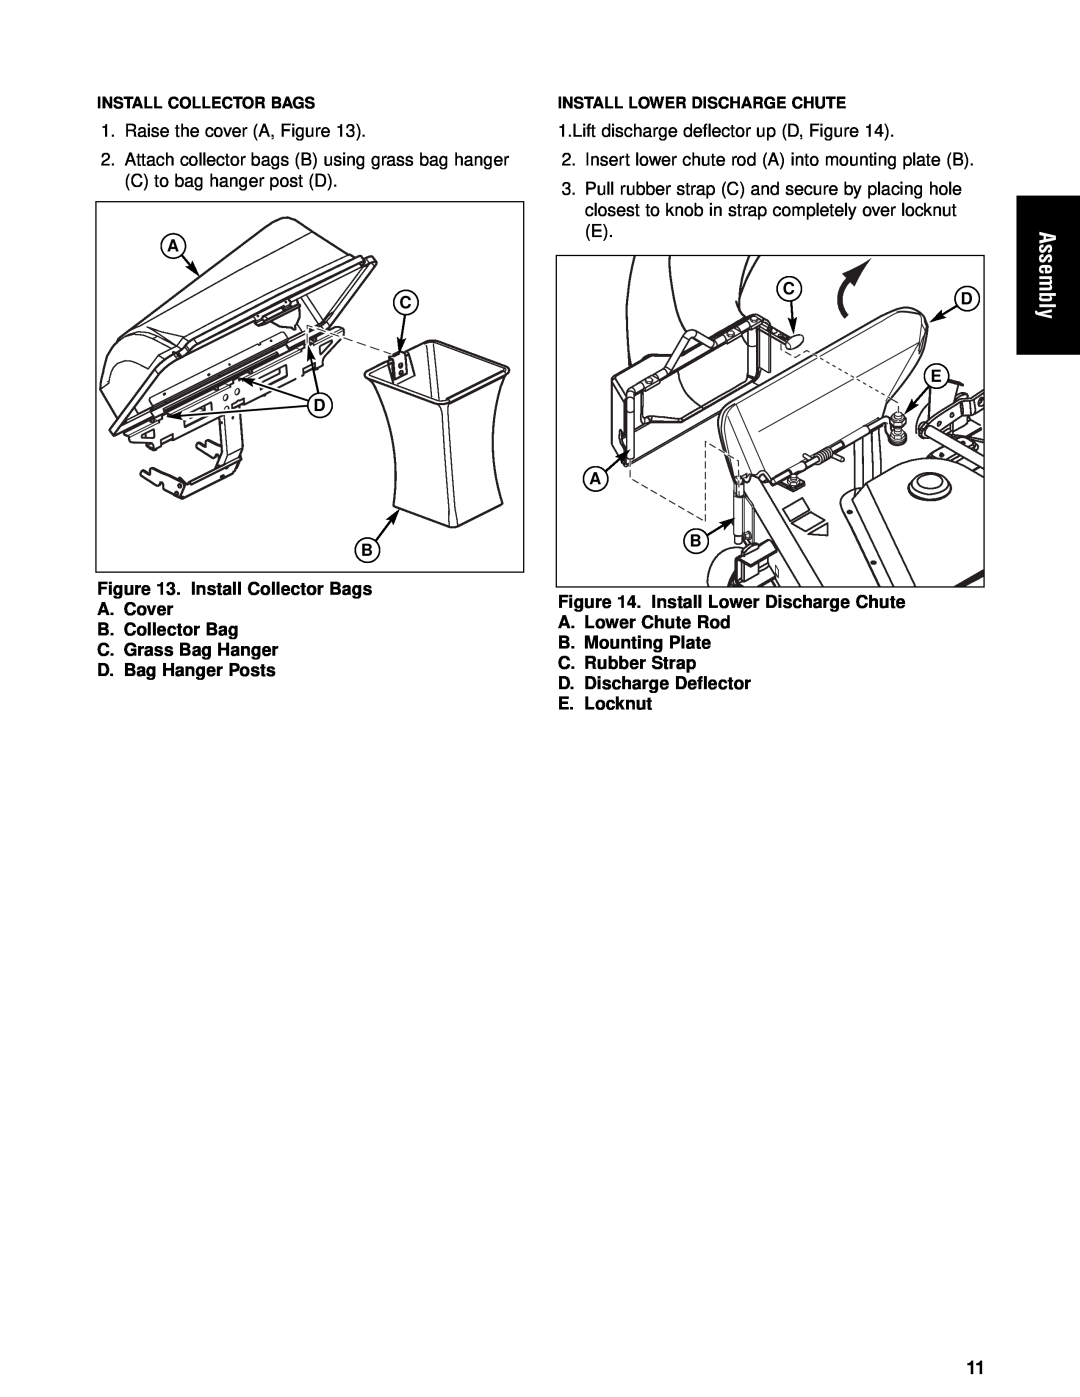 Briggs & Stratton 1695354 manual Raise the cover A, Figure, Attach collector bags B using grass bag hanger, Assembly 